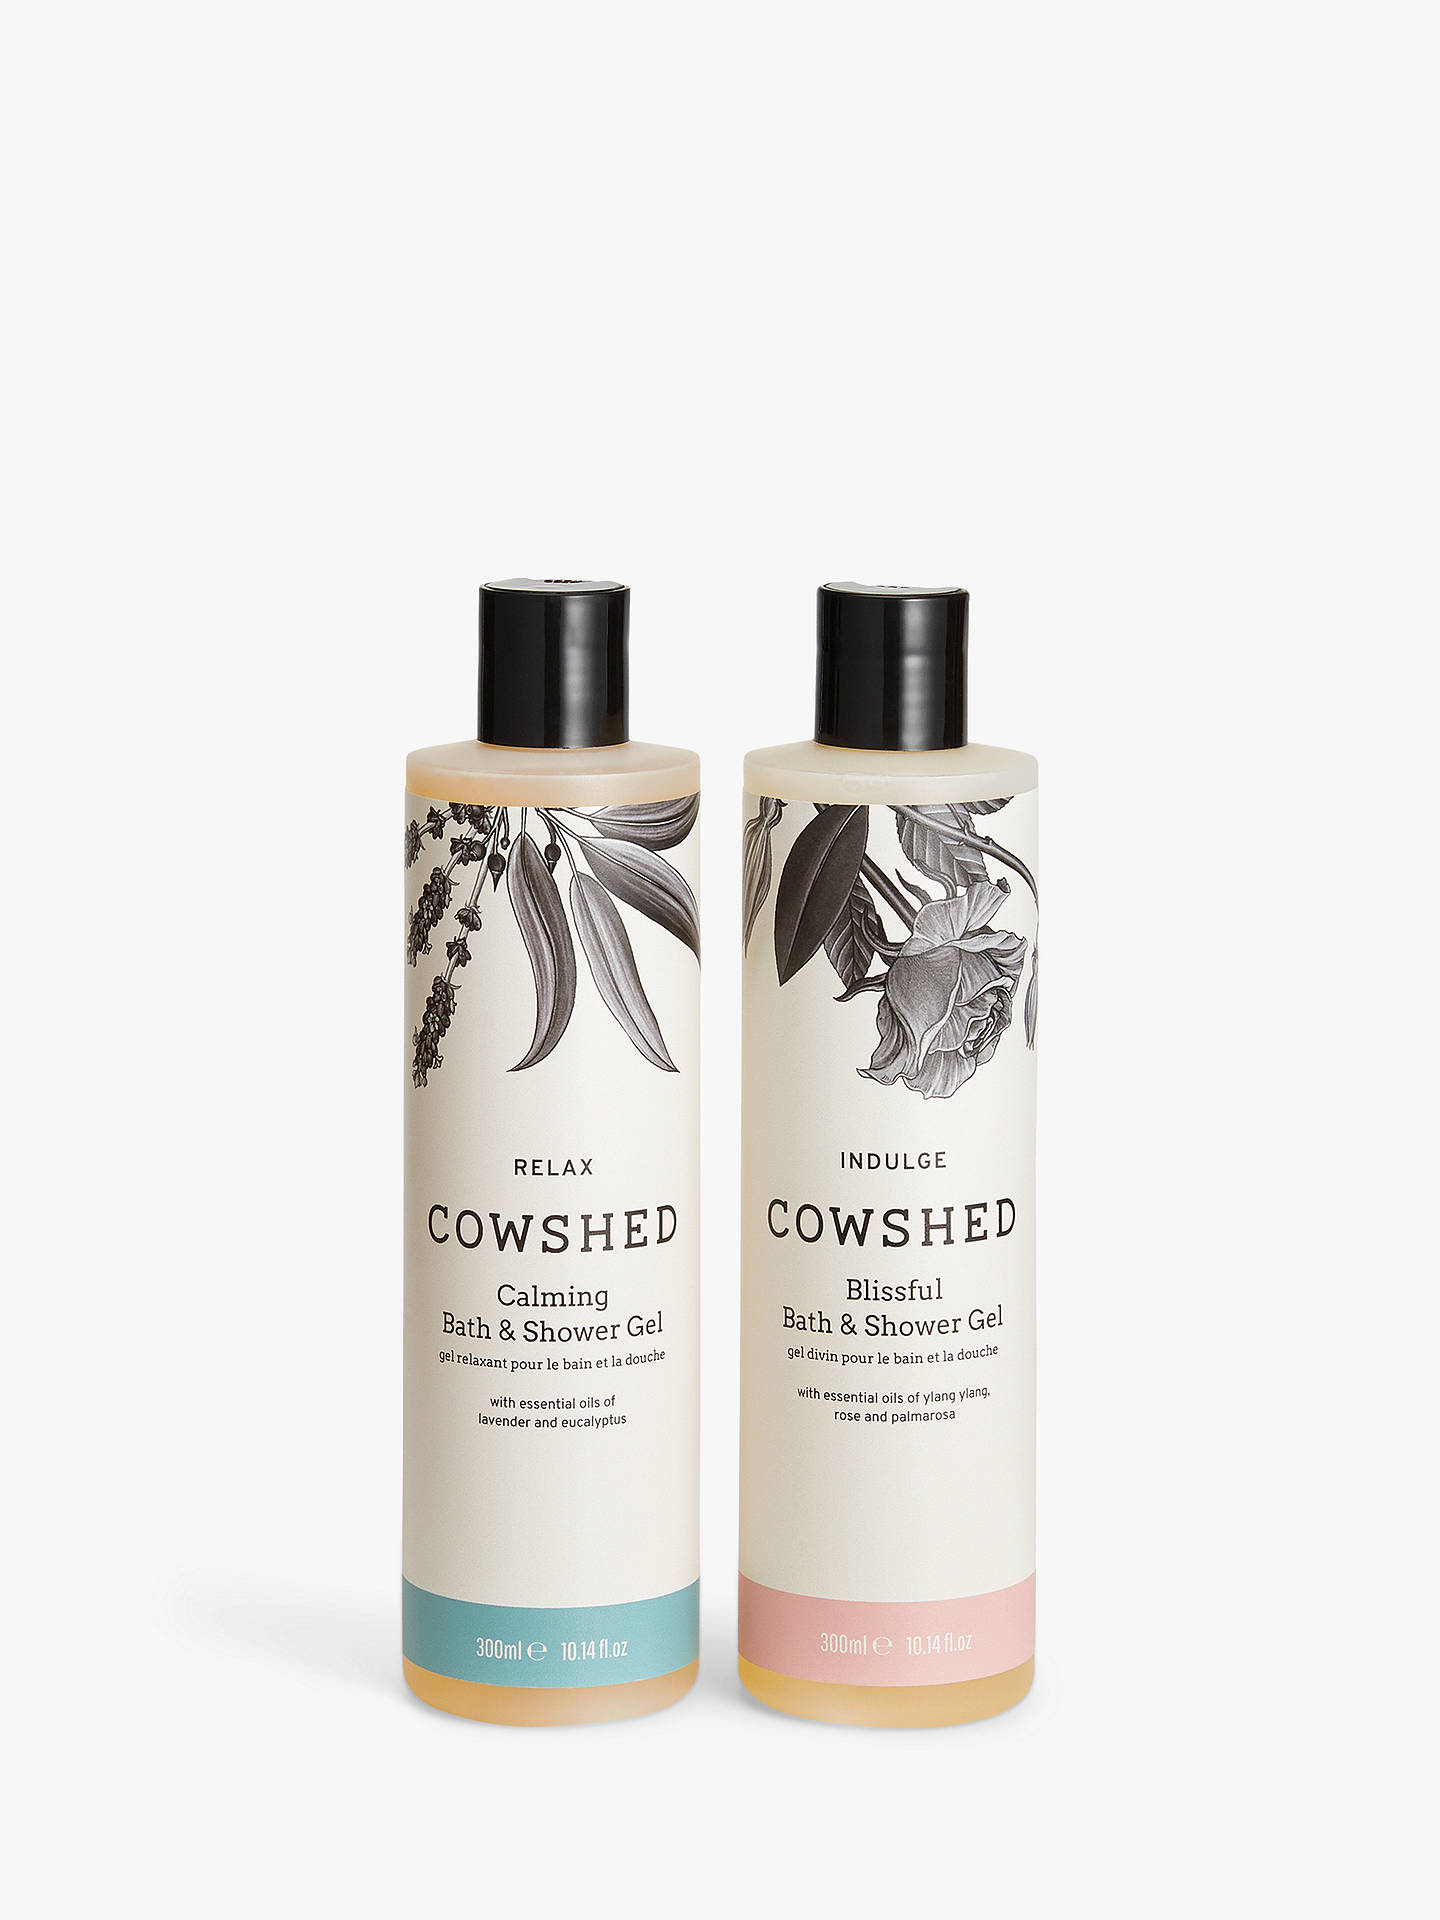 Cowshed Christmas Bath & Shower Gel Duo Bodycare Gift Set at John Lewis & Partners